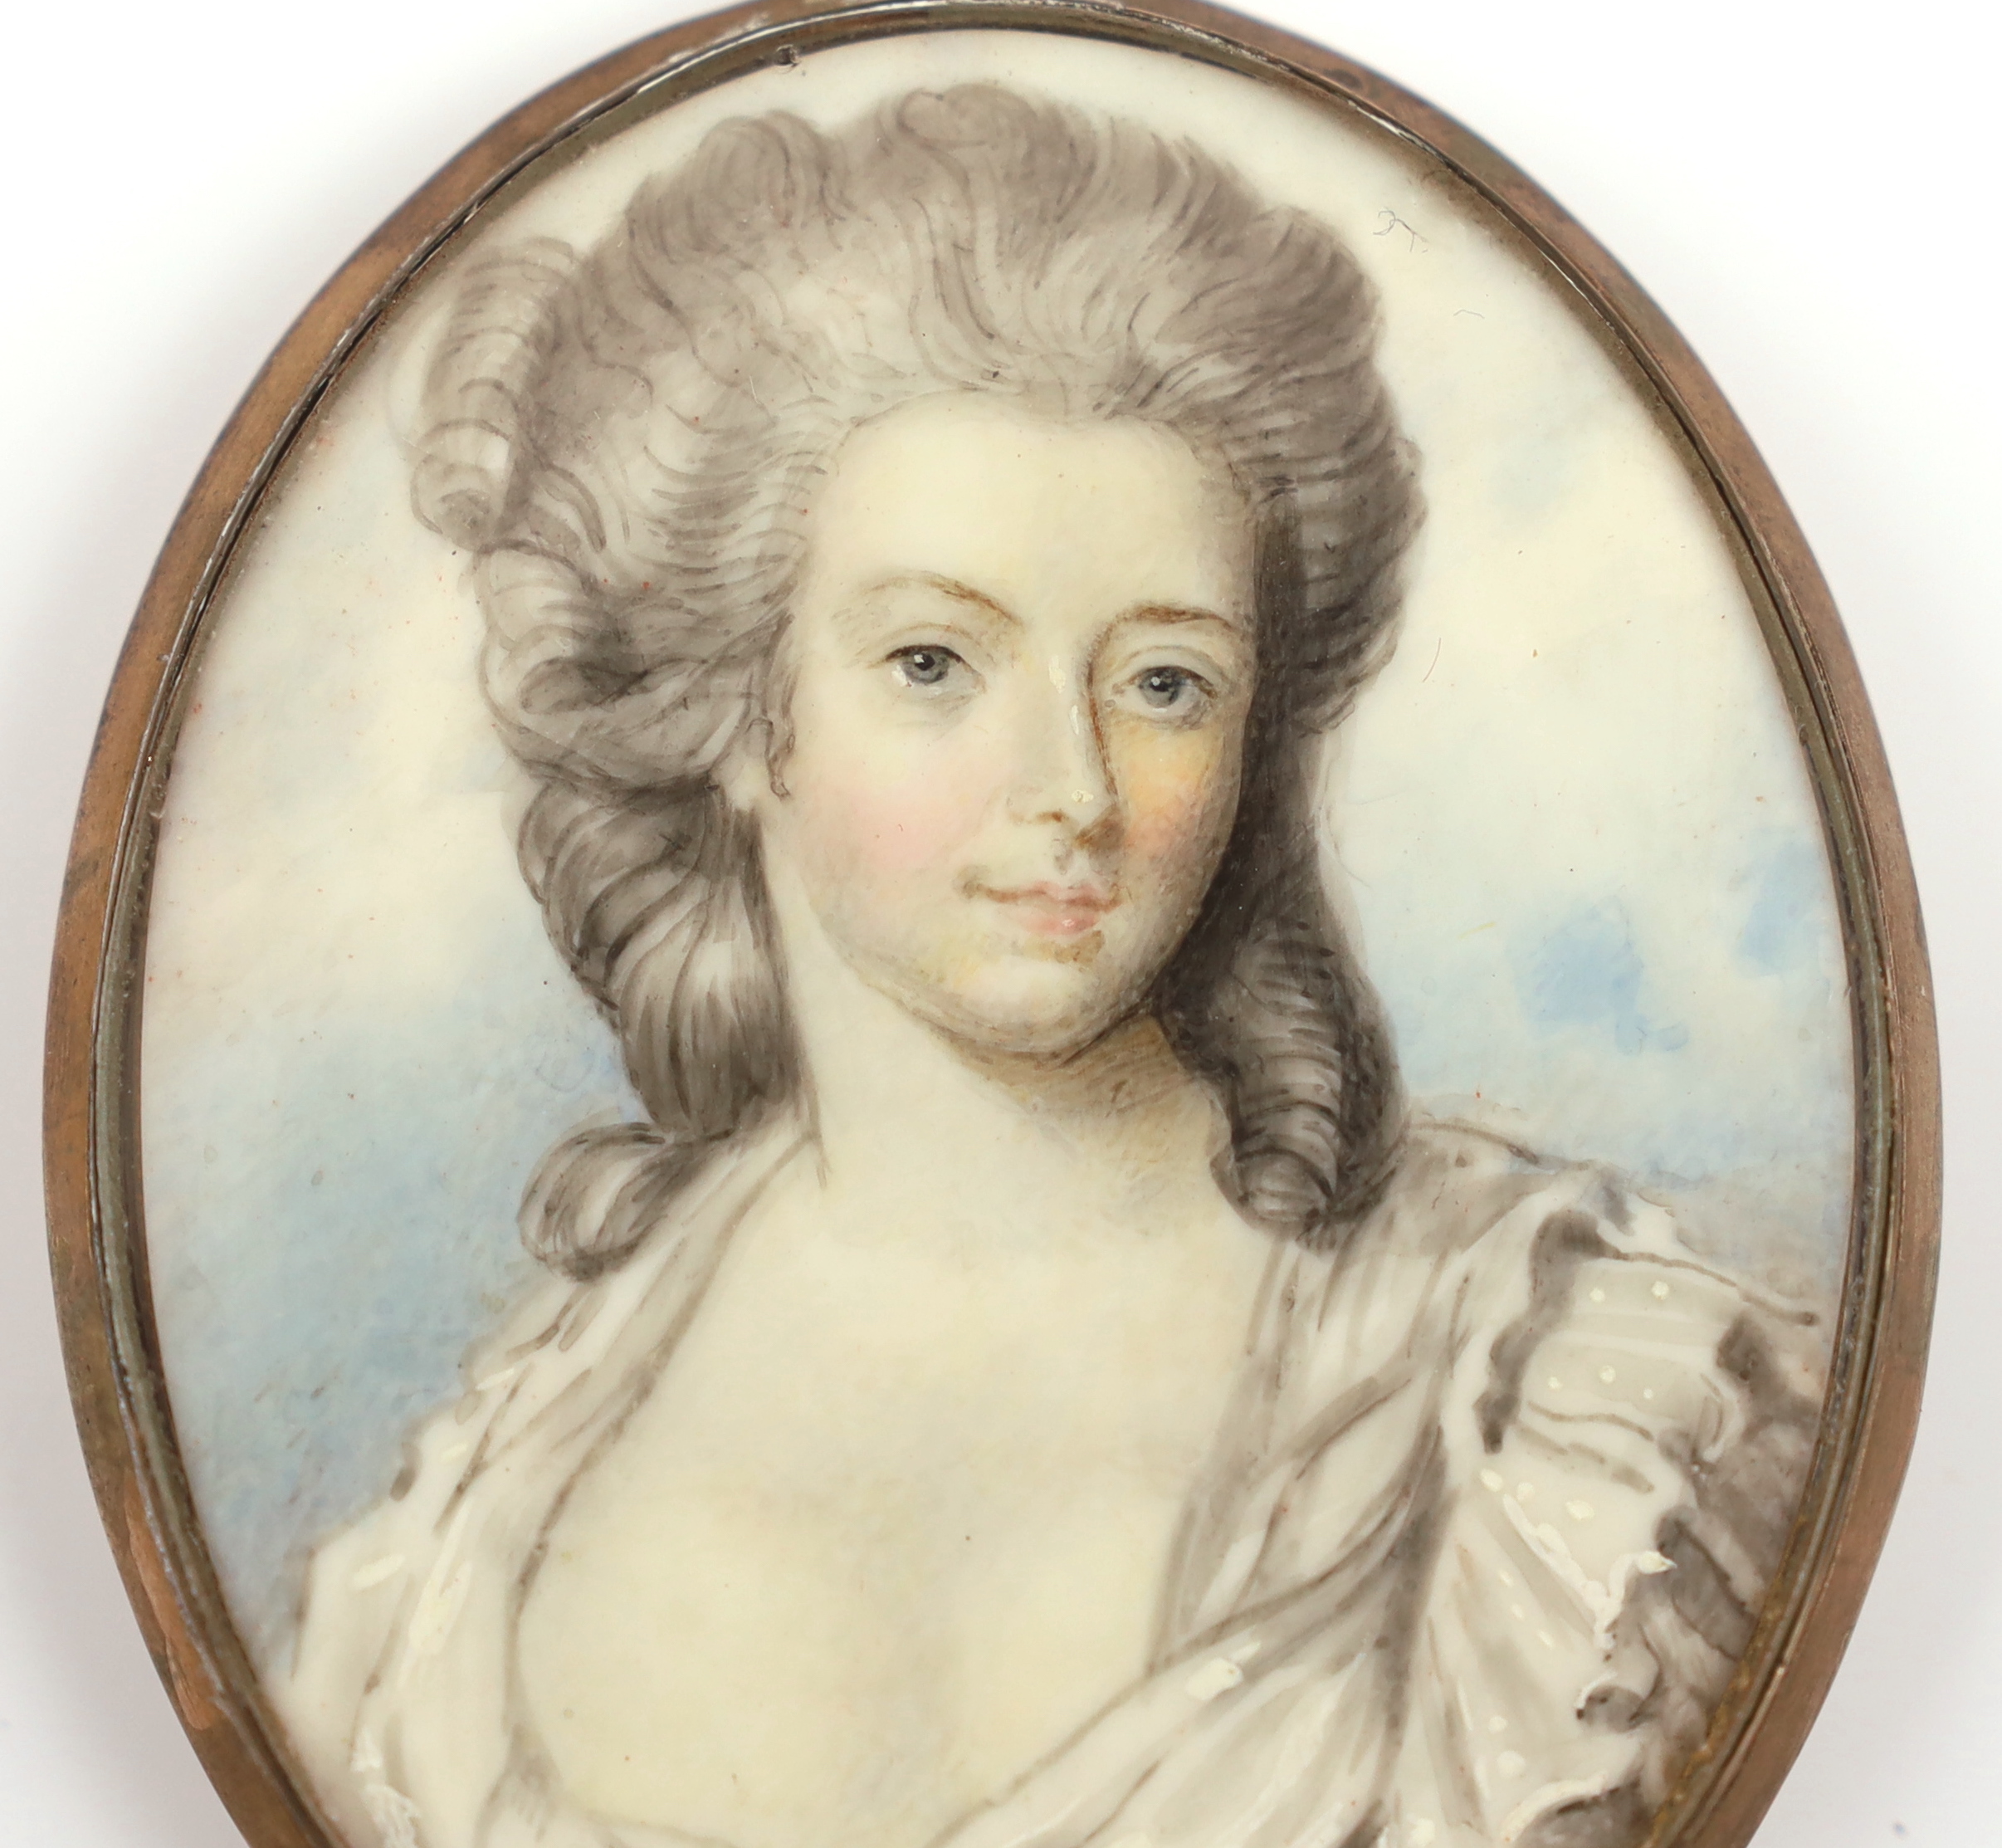 English School circa 1790, Portrait miniature of a lady, watercolour on ivory, 6.4 x 5.2cm. CITES Submission reference 8PWTN3WD